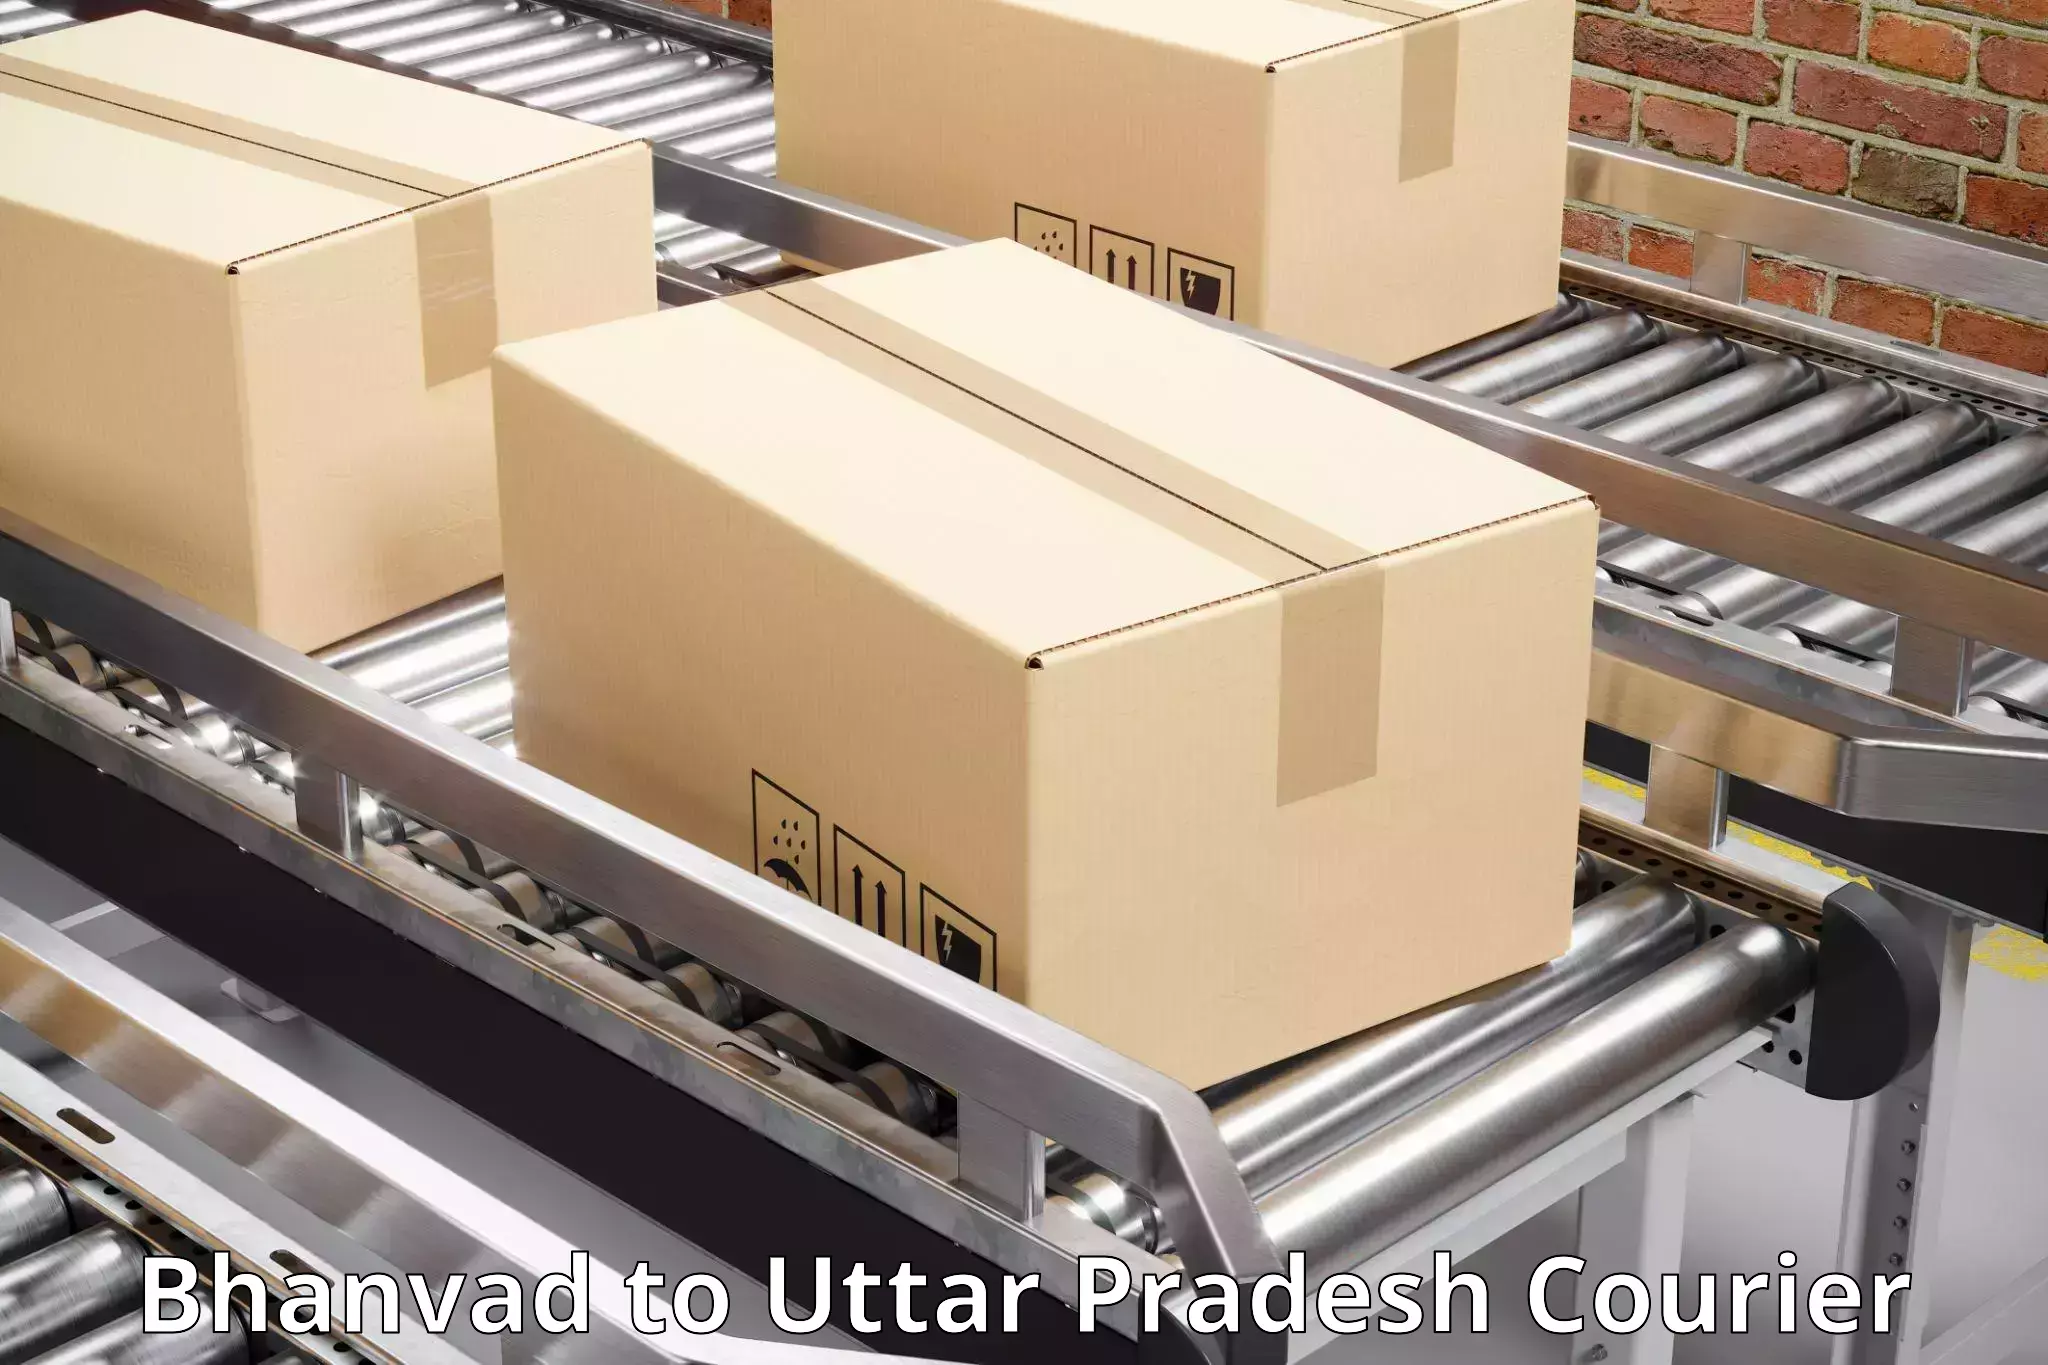 Comprehensive parcel tracking Bhanvad to Aonla